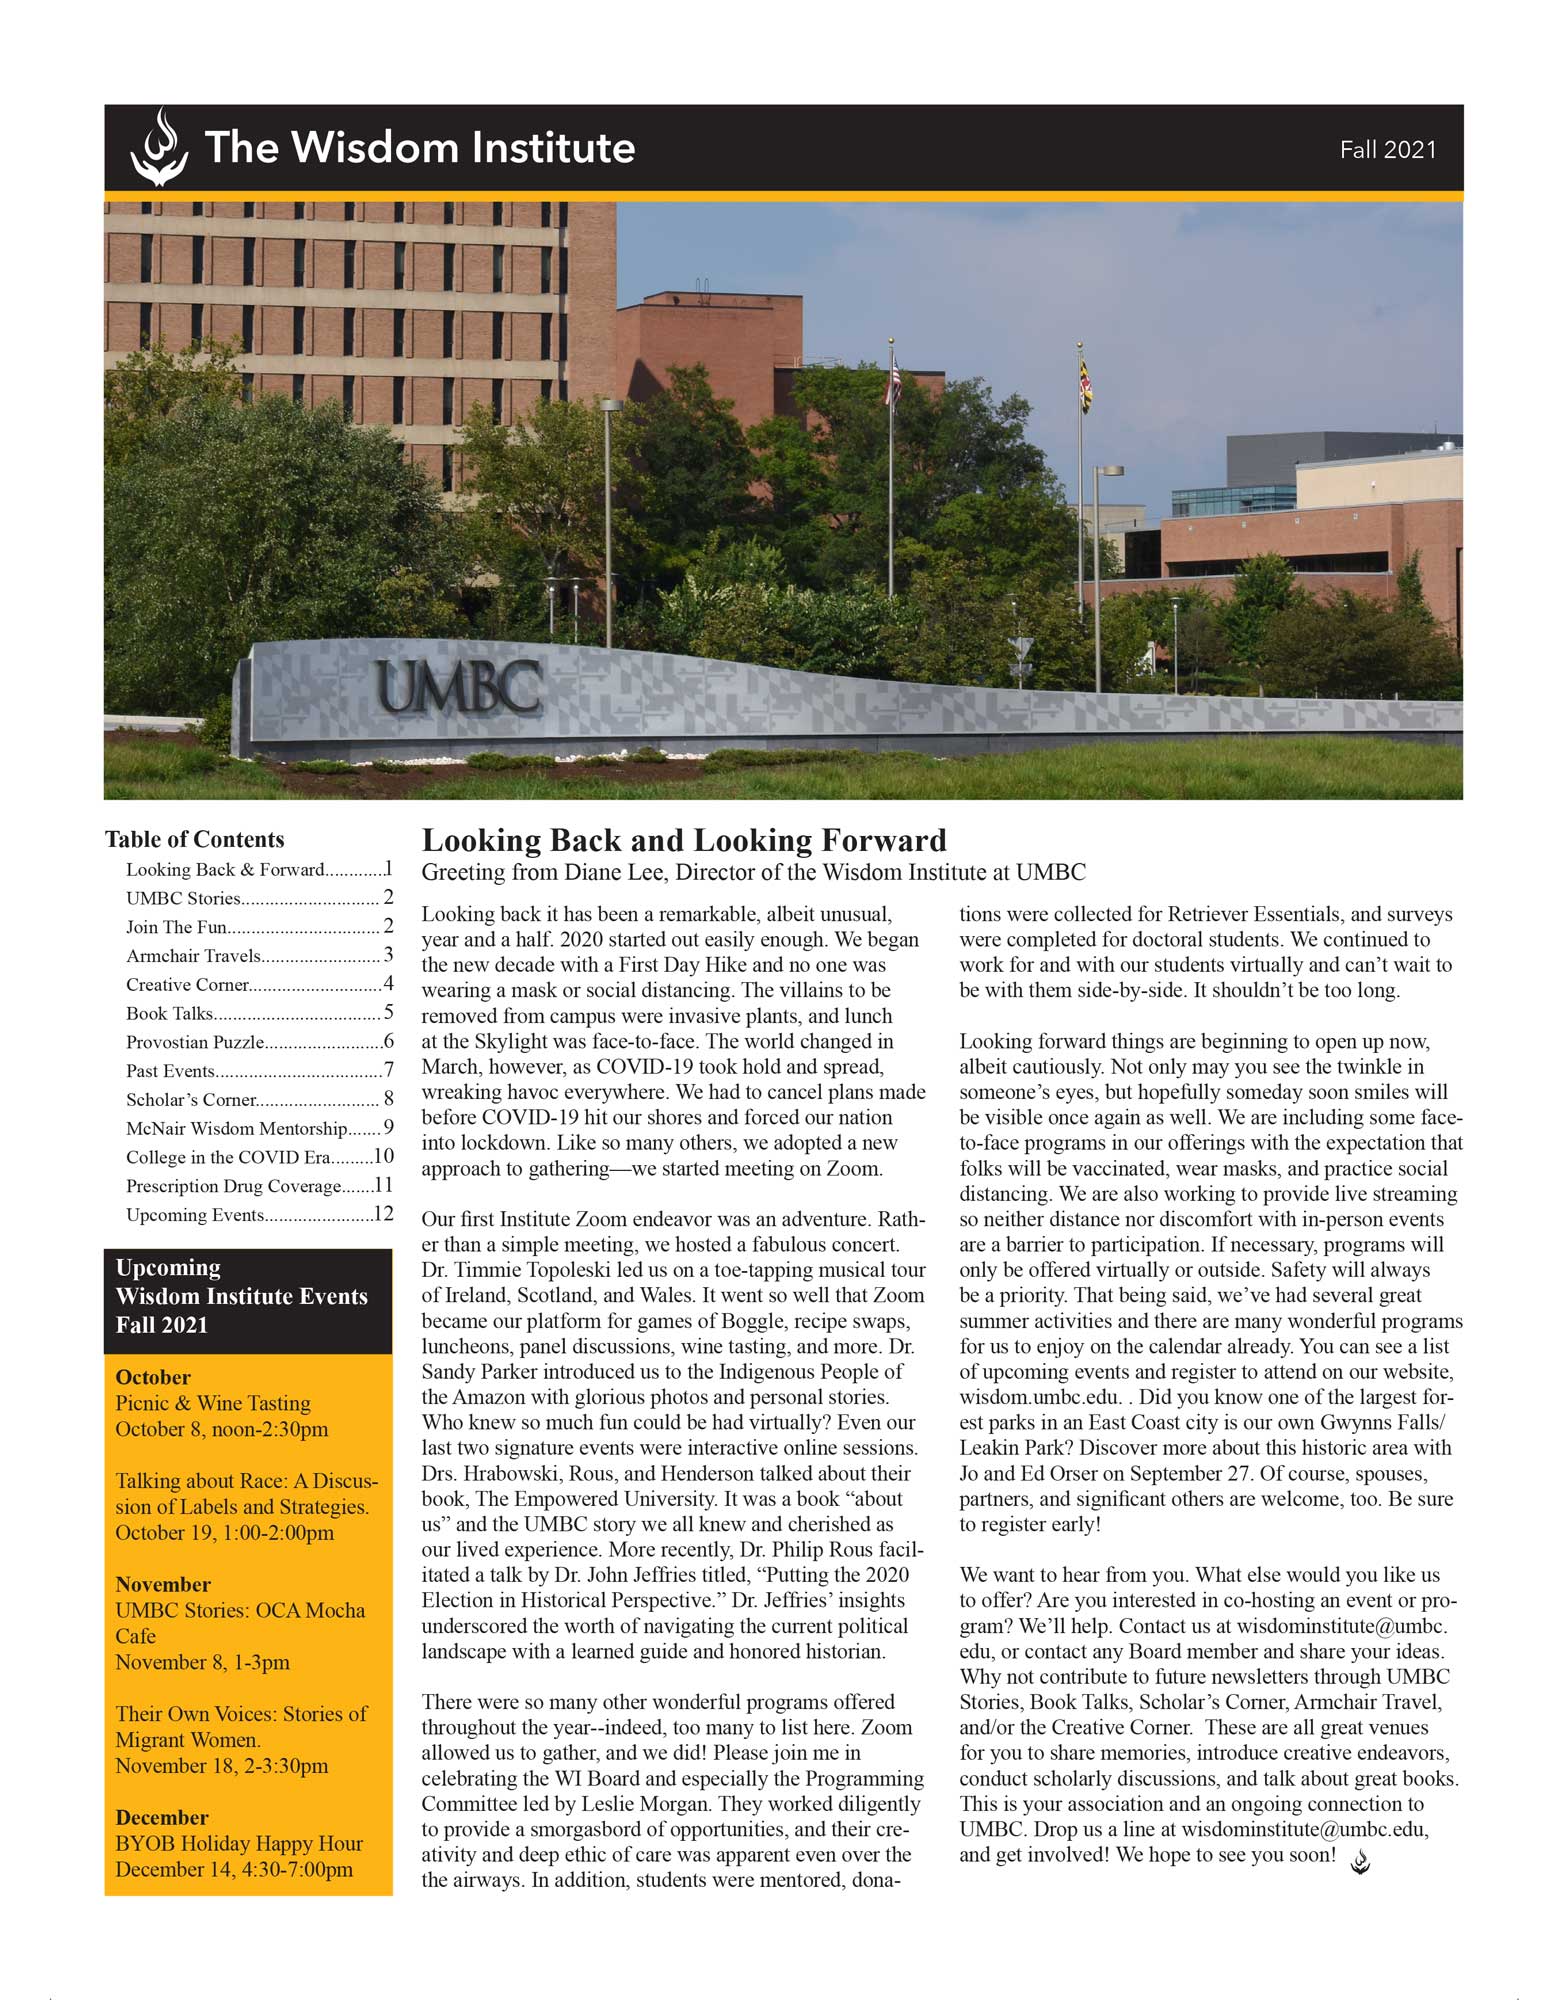 Cover of the Fall 2021 newsletter #5